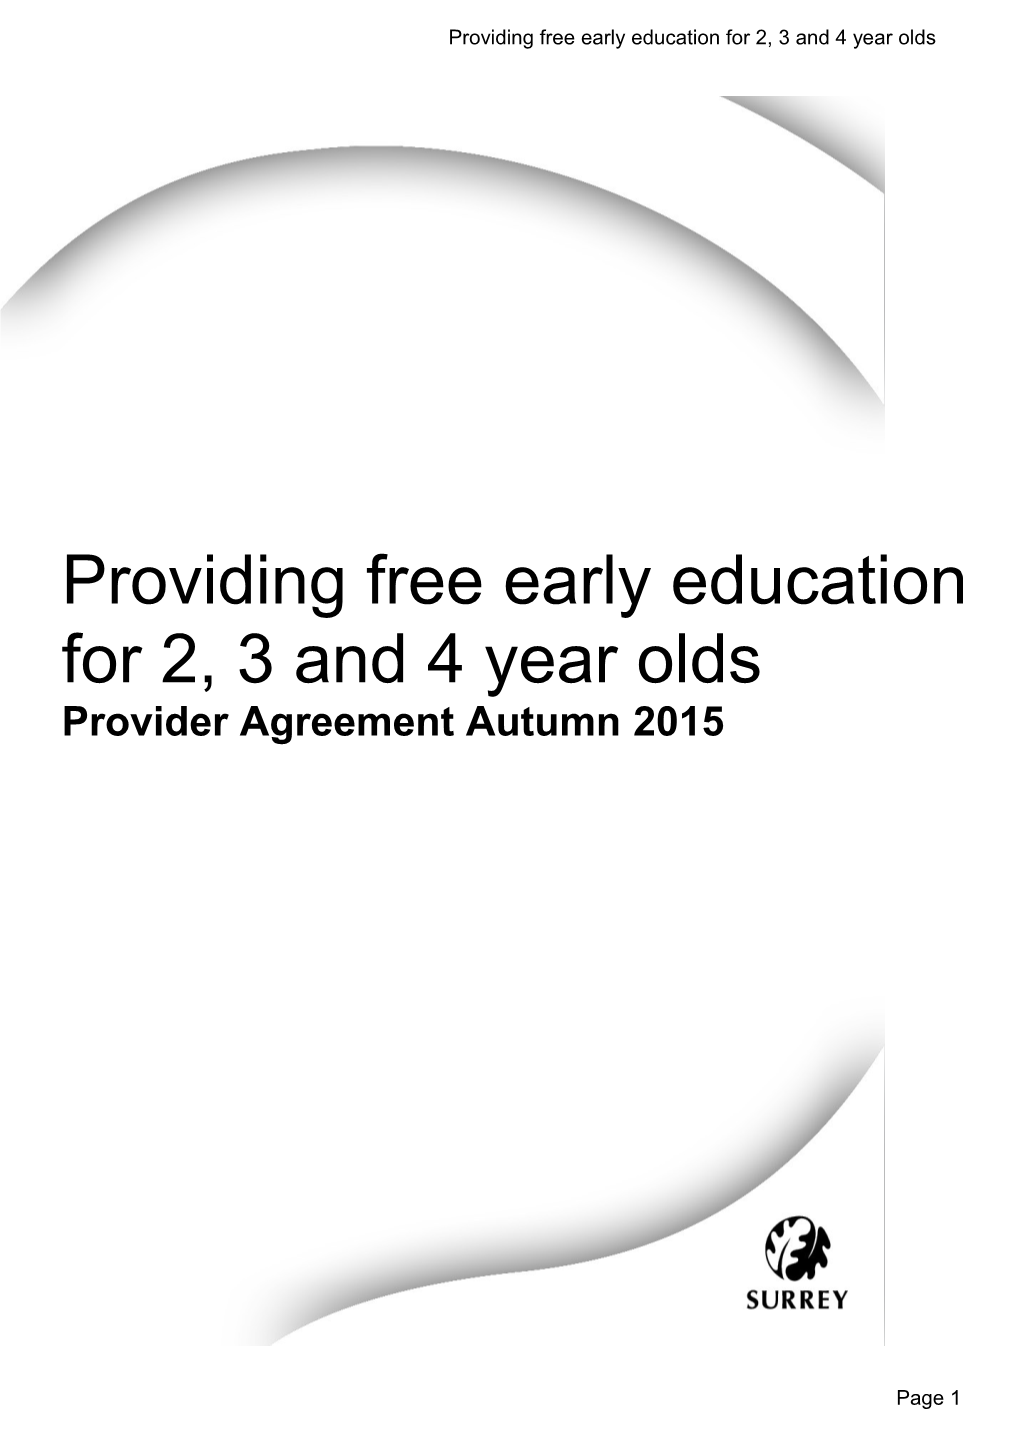 Providing Free Early Education for 2, 3 and 4 Year Olds